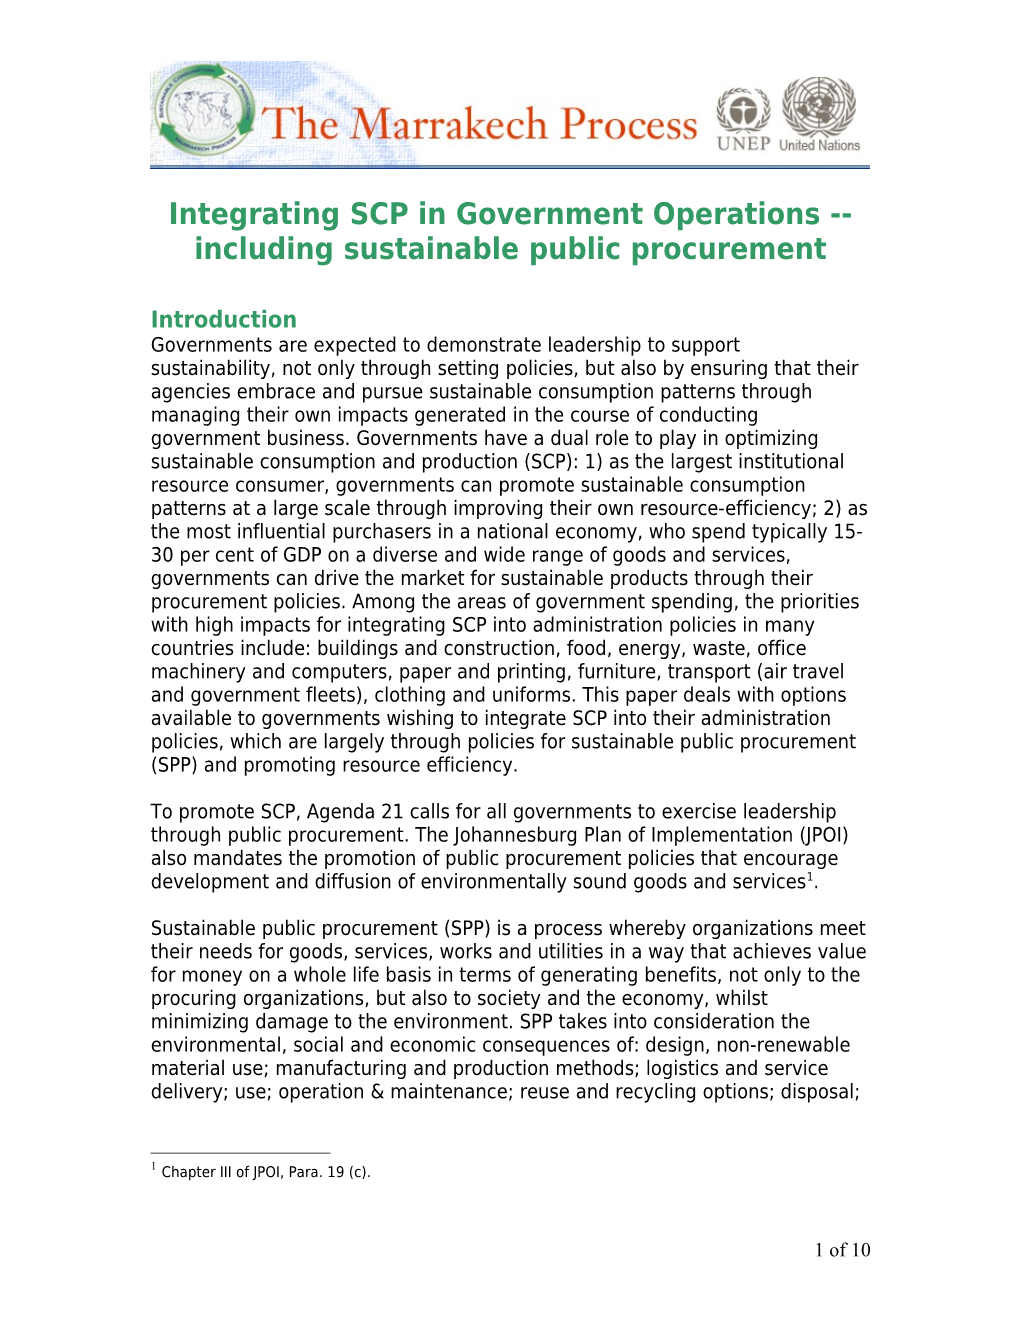 Integrating SCP in Government Administration Policies